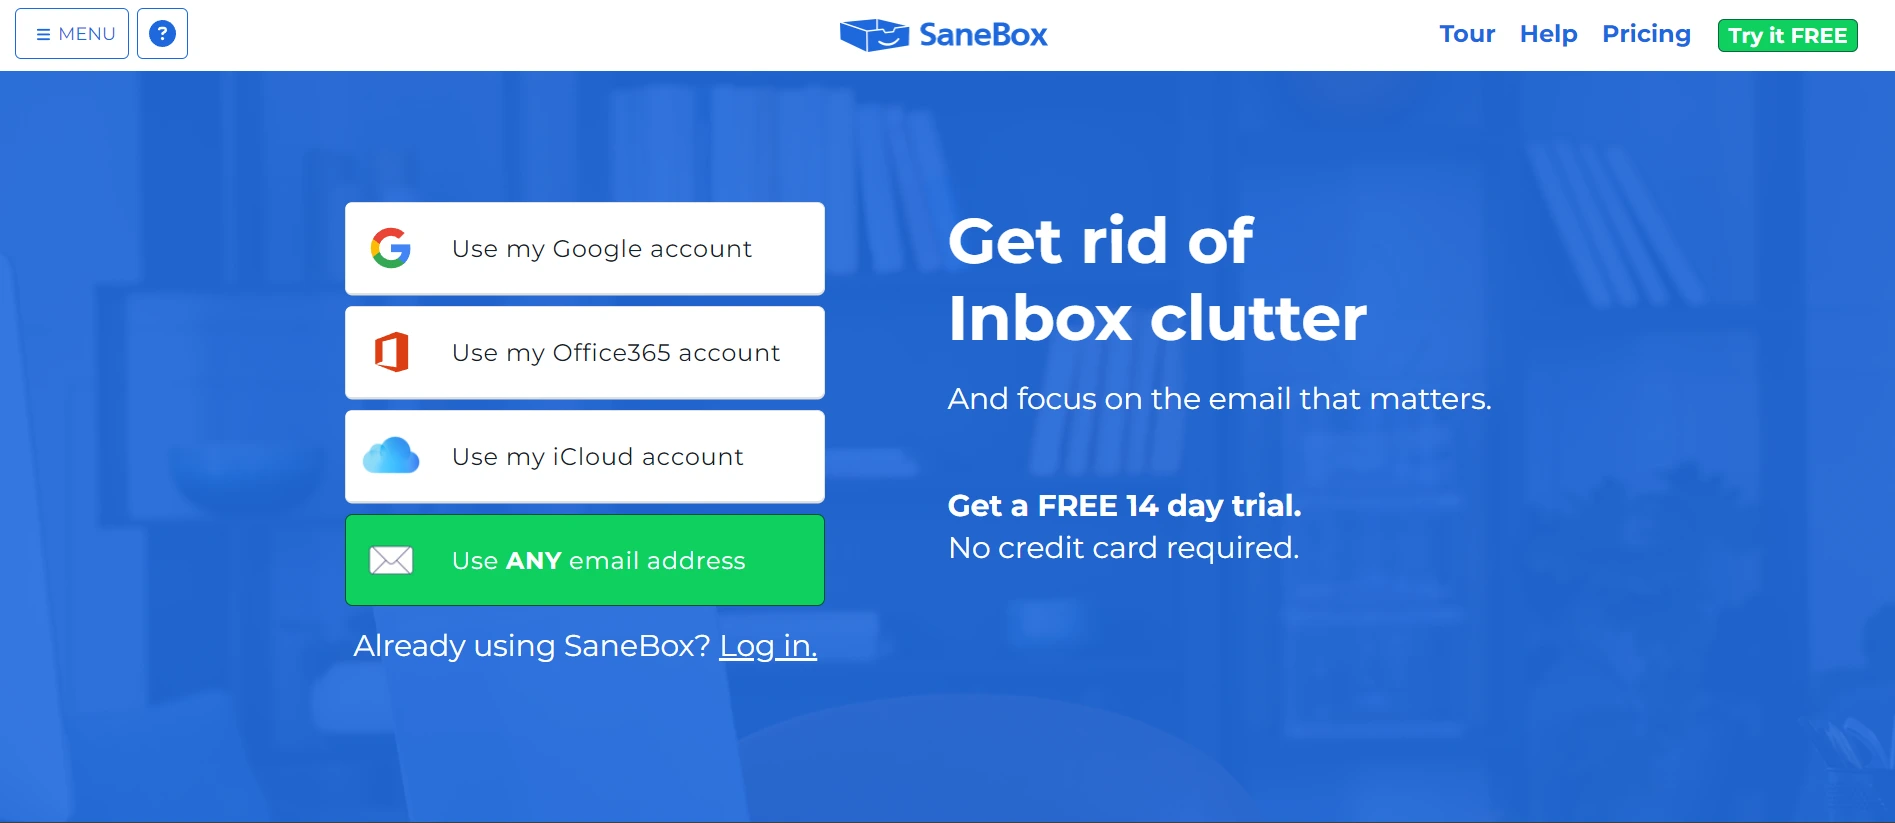 SaneBox AI used to redefine all your emails using AI